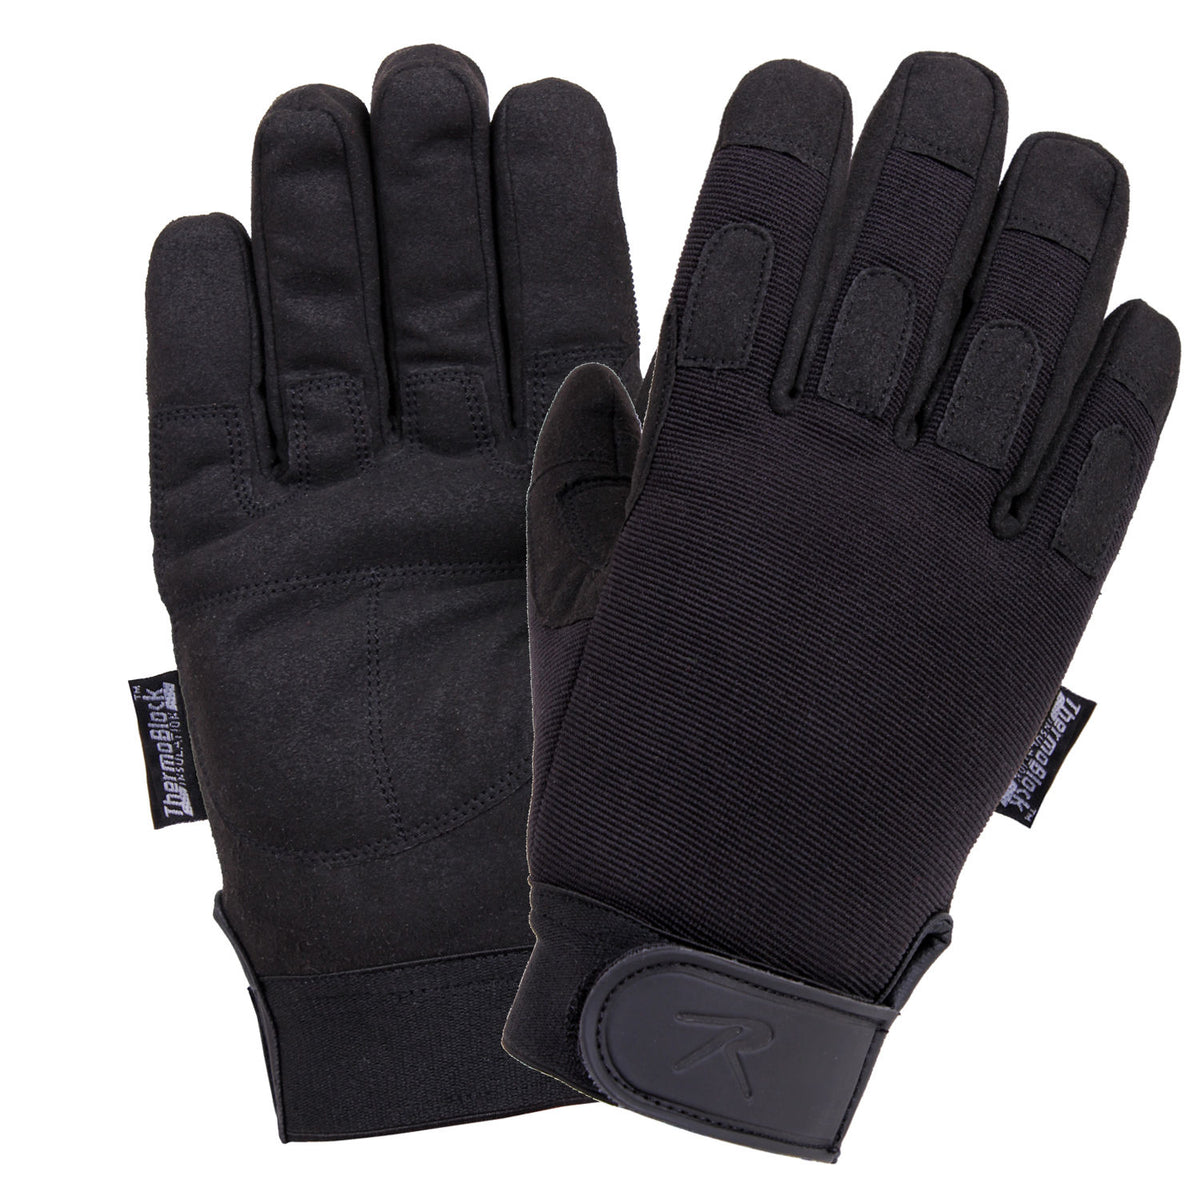 Rothco Cold Weather All Purpose Duty Gloves - BLACK